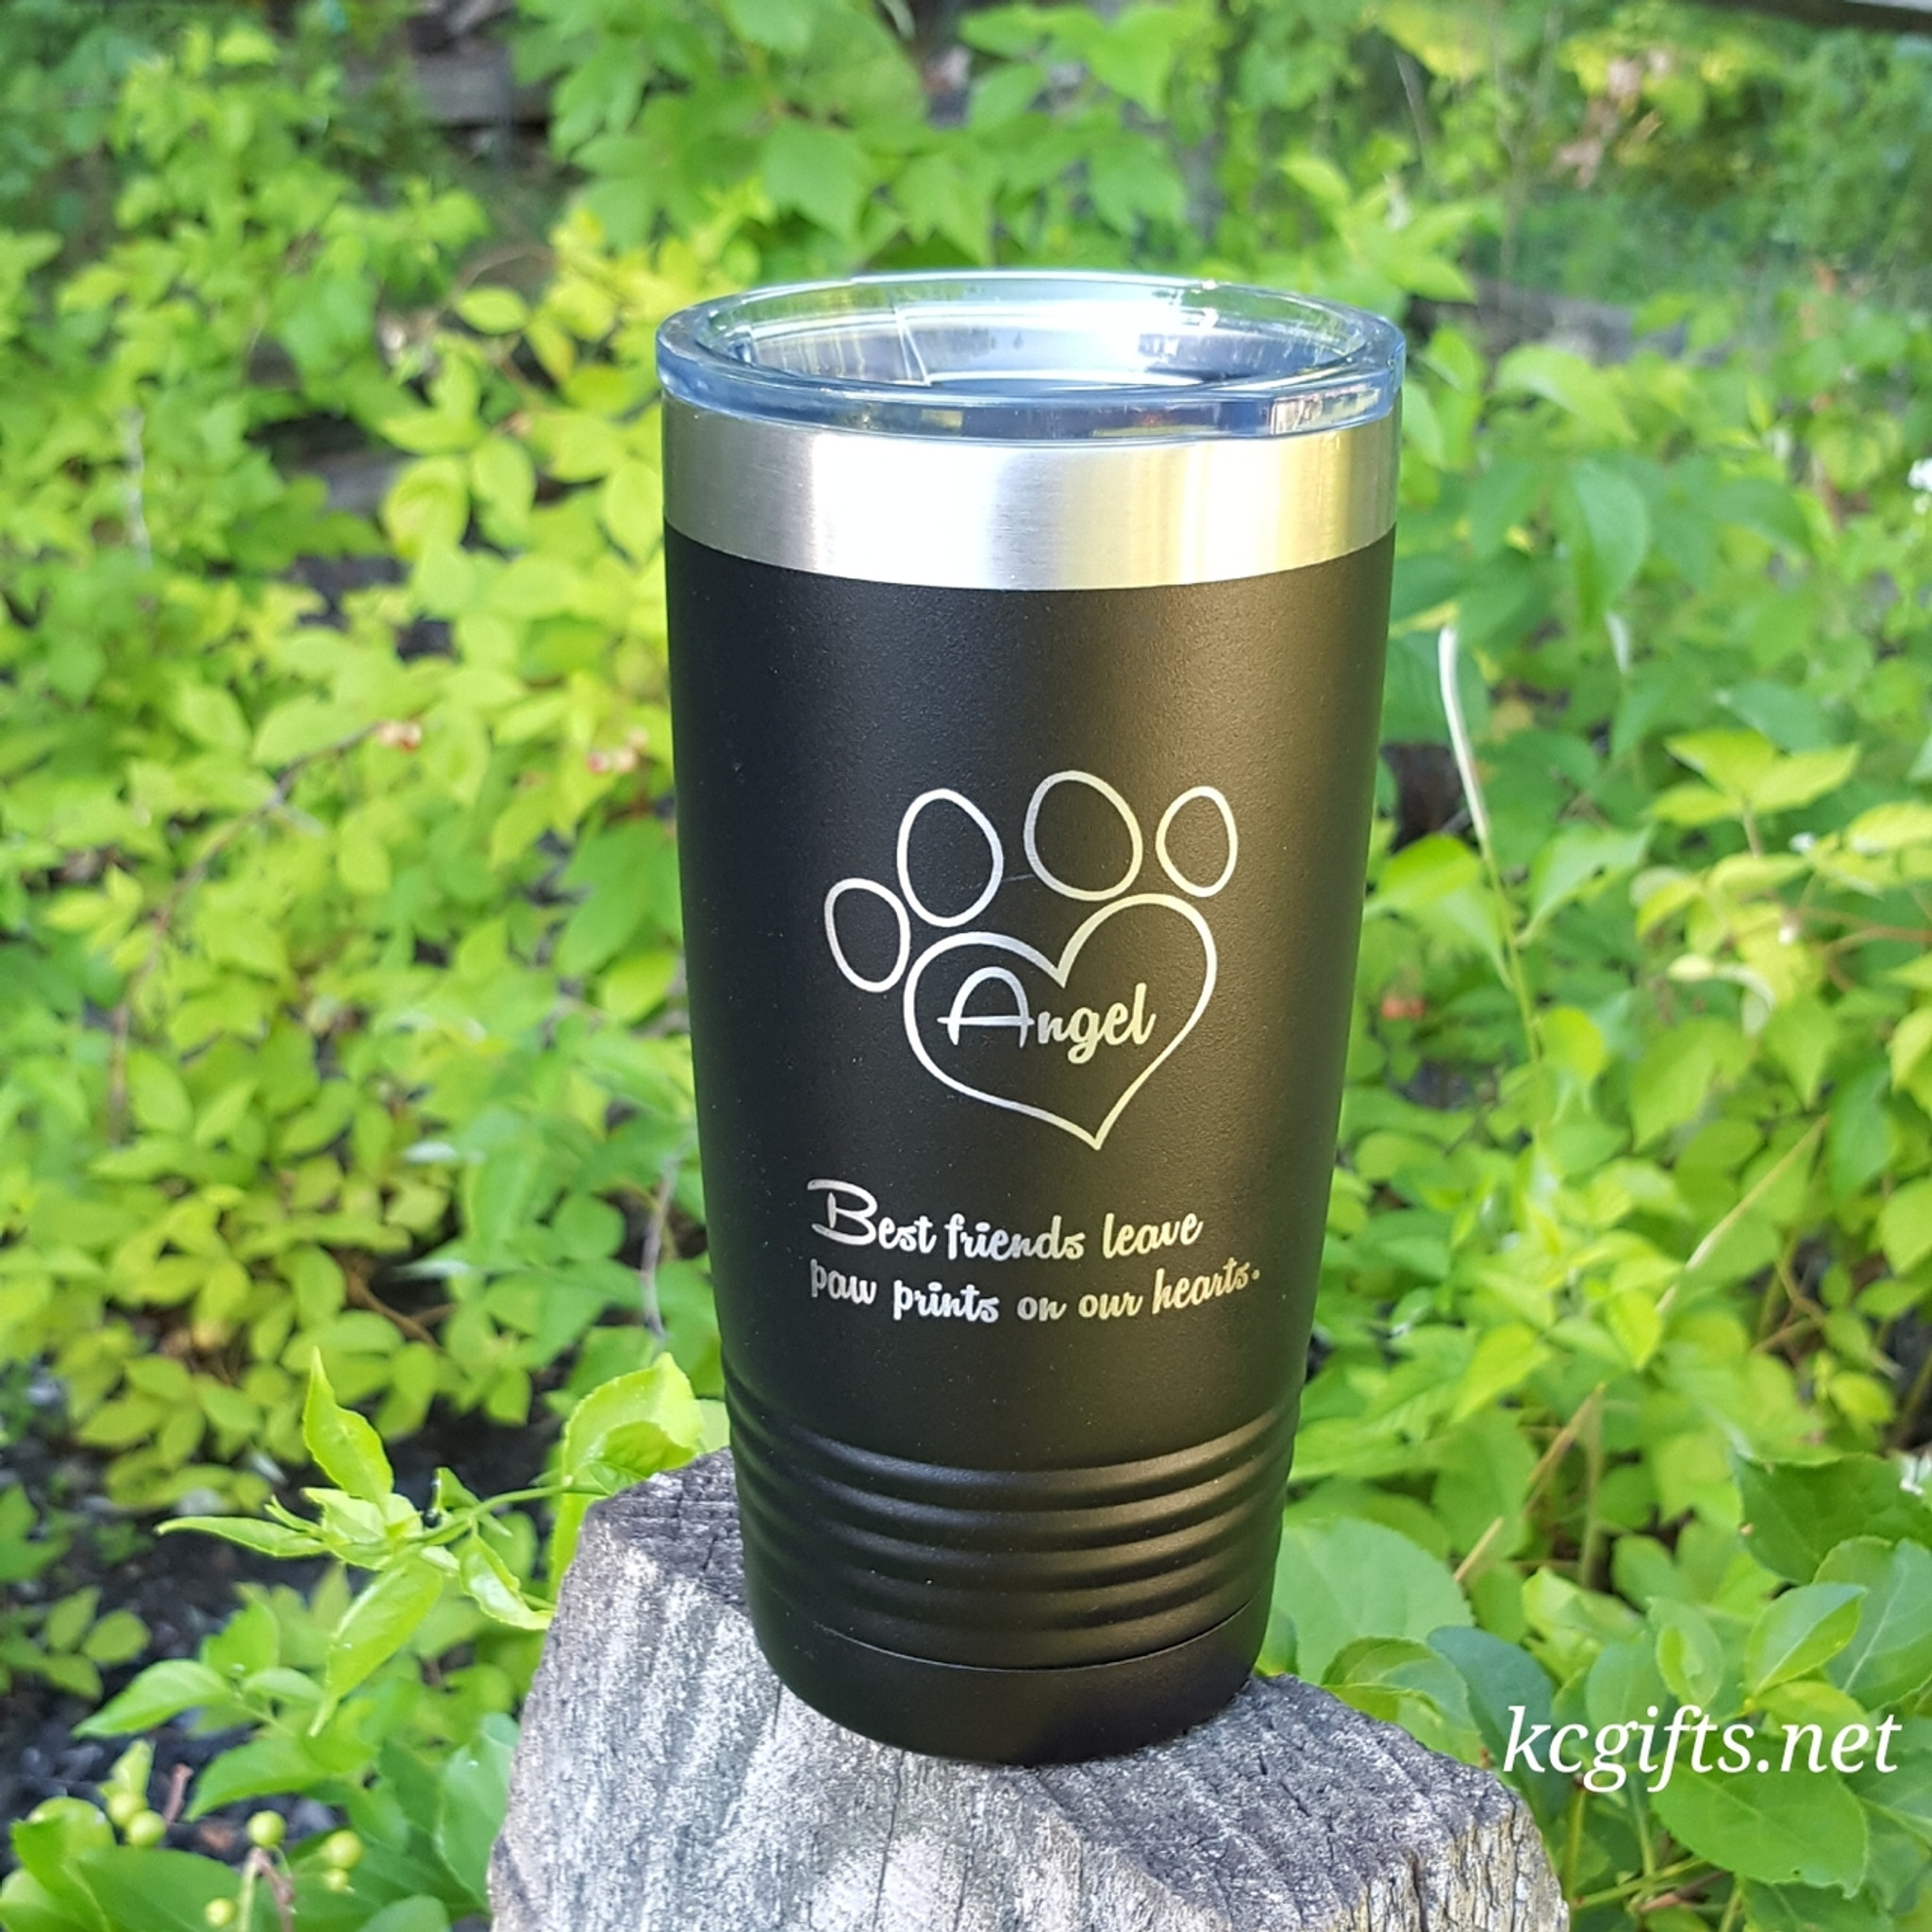 Doctor Gift, Personalized Engraved YETI® or Polar Camel or Igloo